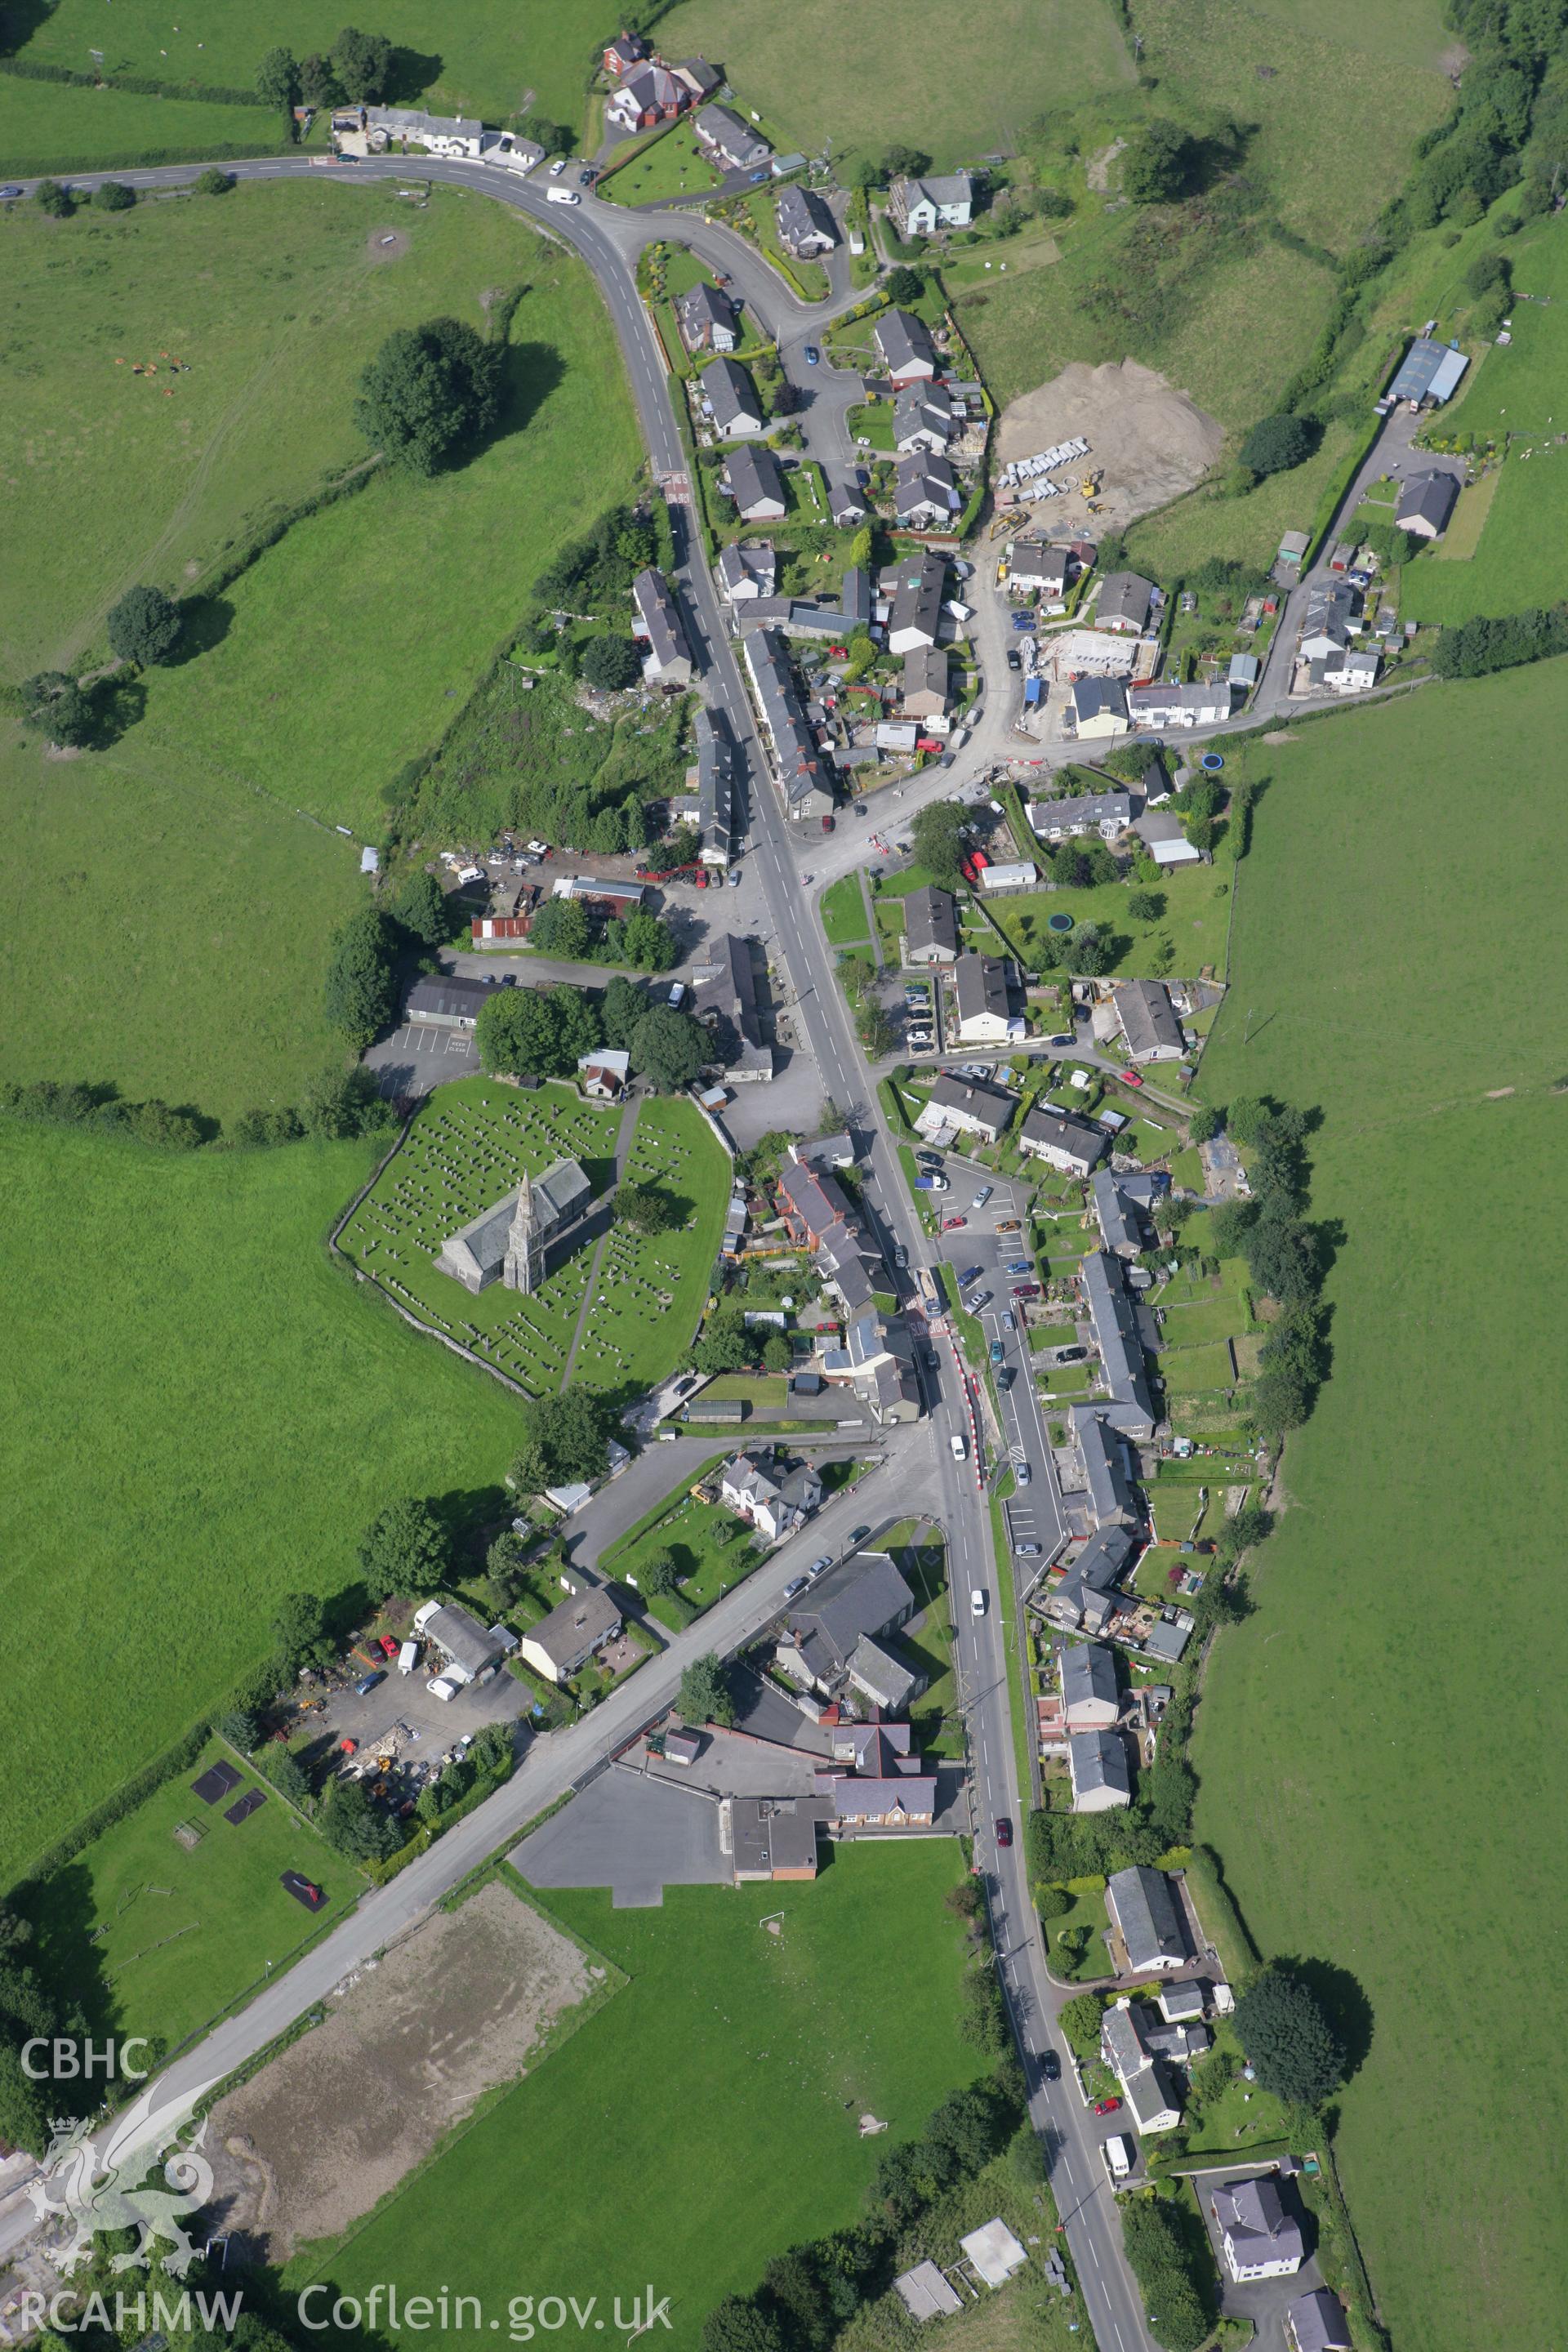 RCAHMW colour oblique aerial photograph of St Beuno's Church, in view of Gwyddelwern village. Taken on 31 July 2007 by Toby Driver